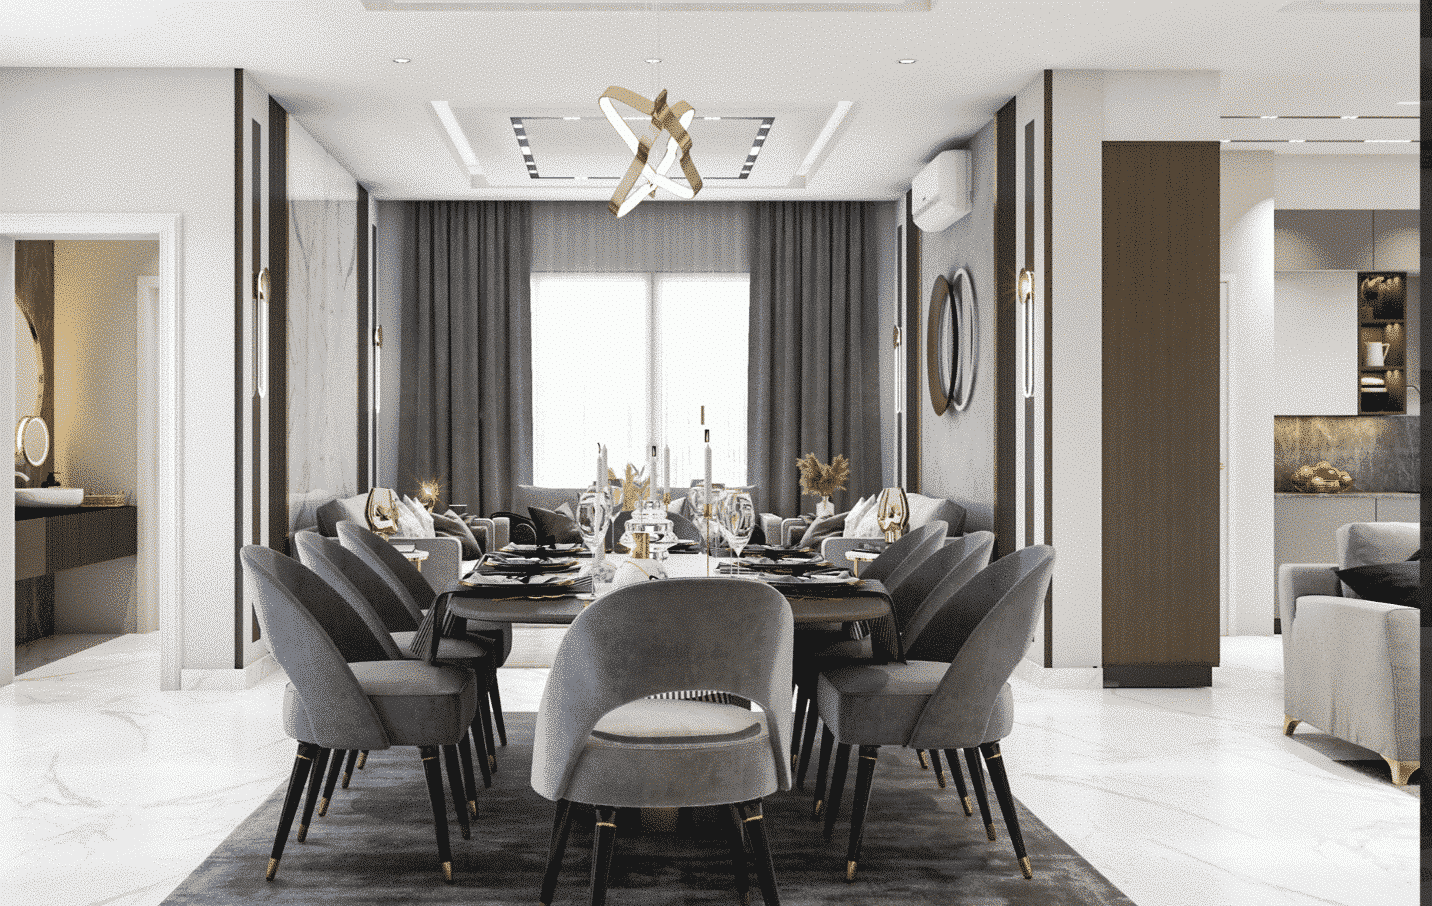 The Best luxury Dining Rooms In Egypt, The Best luxury Dining Room In Cairo, Modern Dining Room Egypt 2023, ارقي معرض اثاث في مصر, Best Dinning rooms store, اسعار سفرة